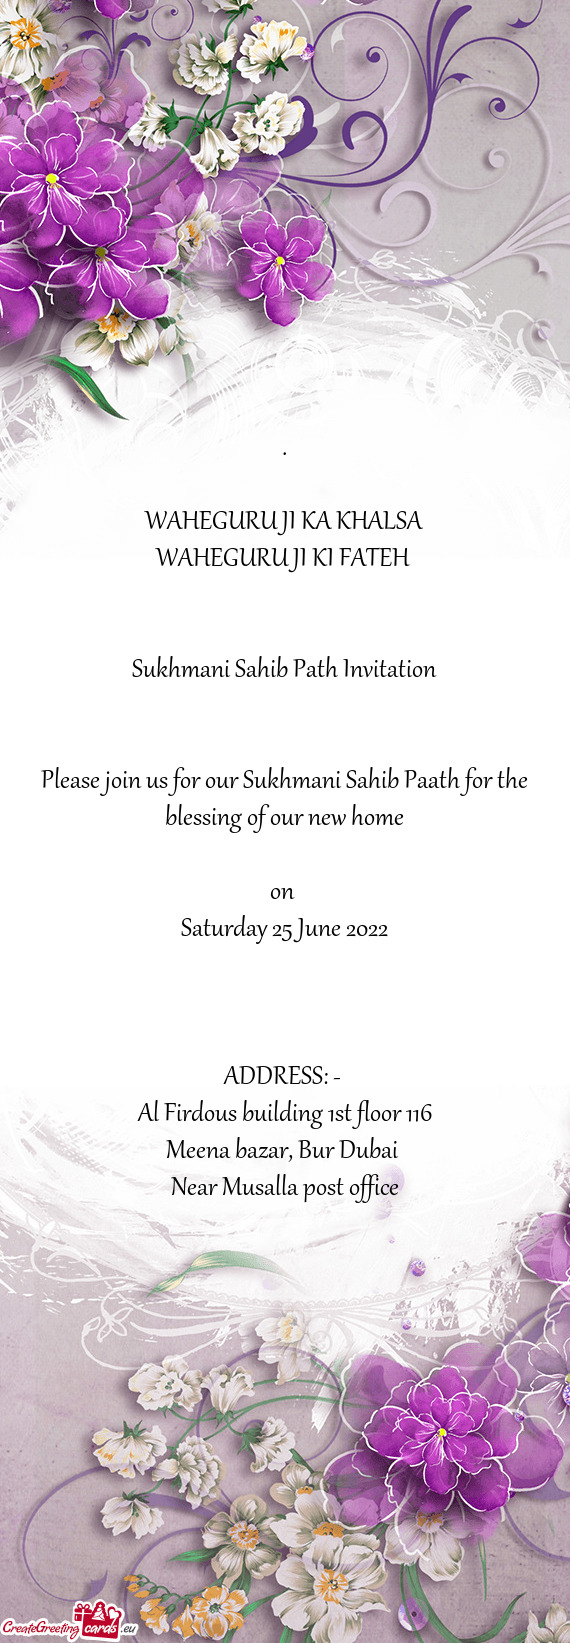 Please join us for our Sukhmani Sahib Paath for the blessing of our new home